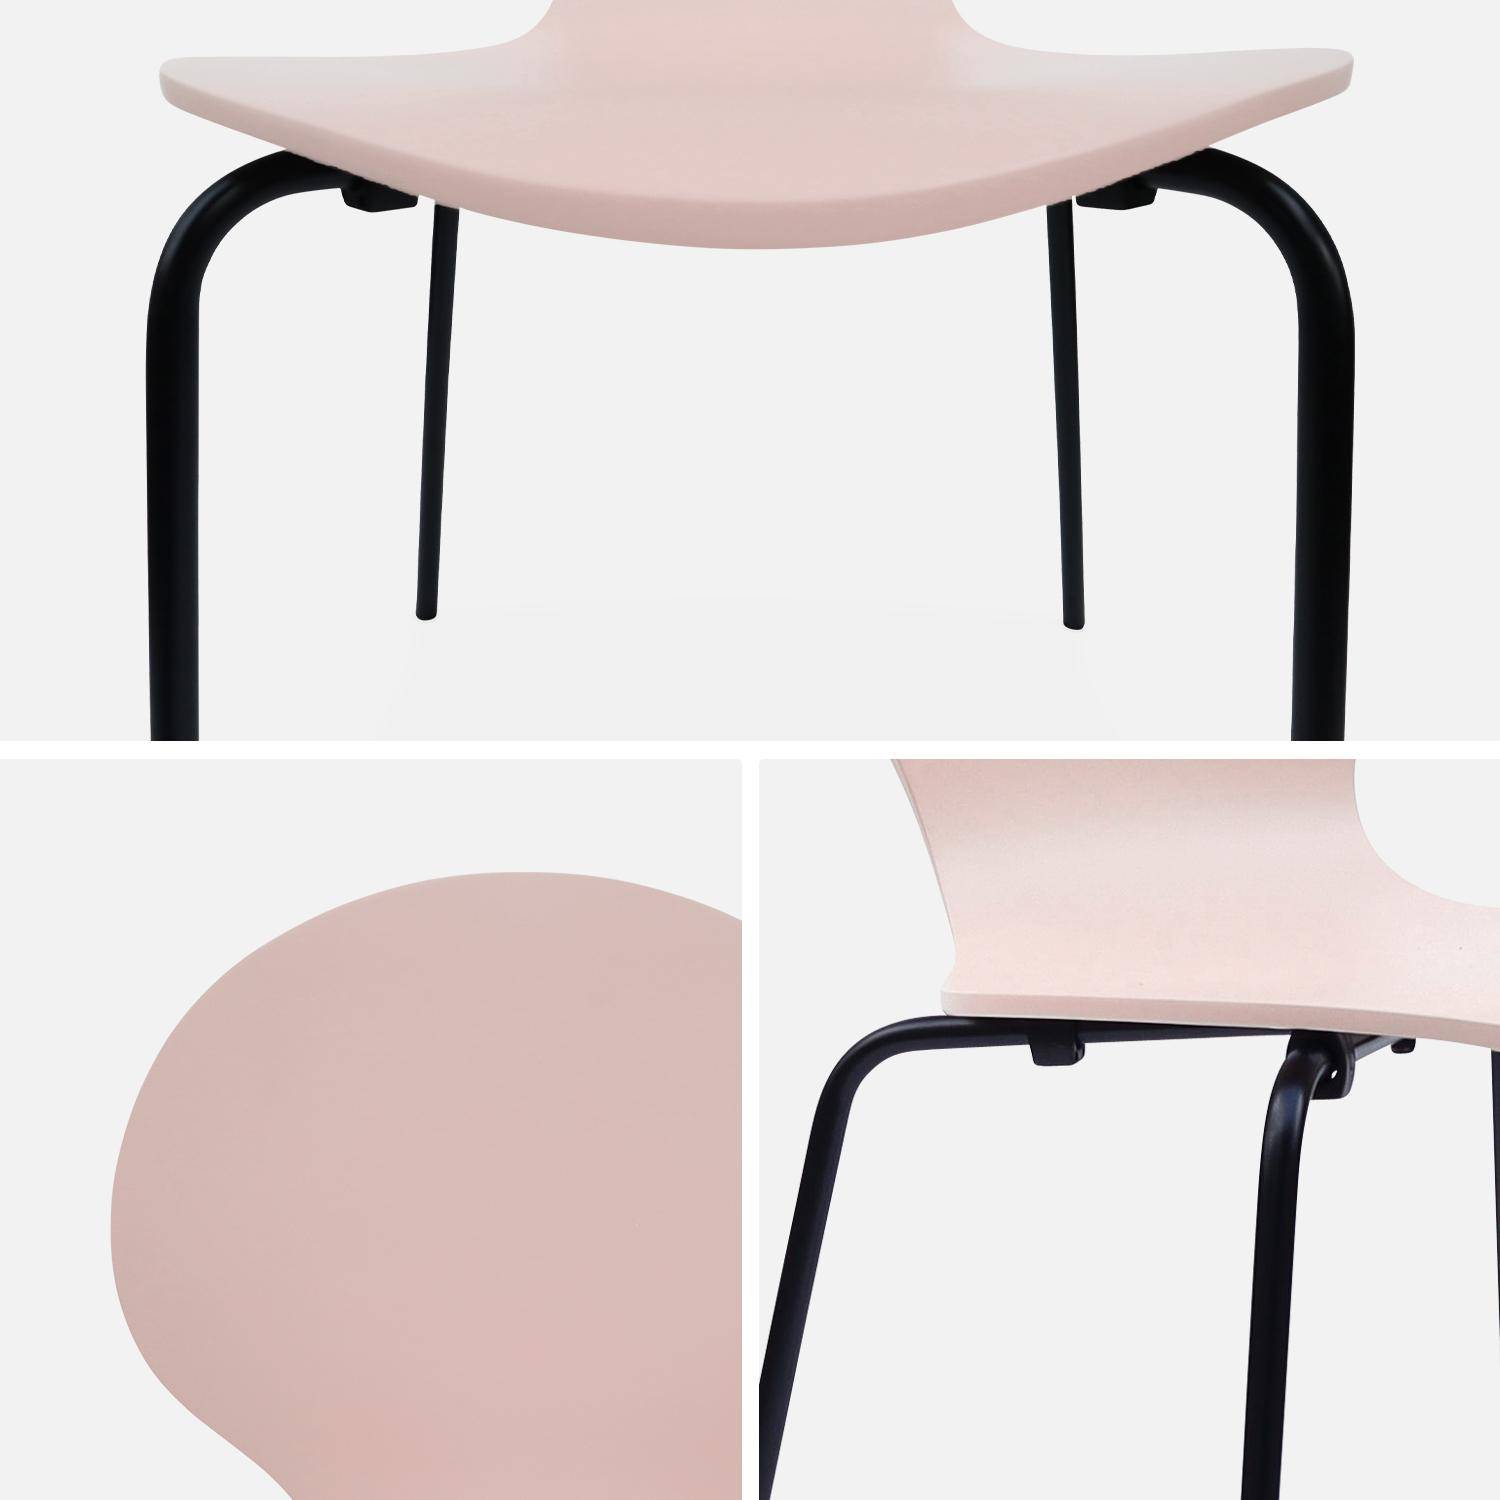 Set of 4 stackable Retro Chairs, Wood and Plywood, L43xW48xH87cm, pink Photo7